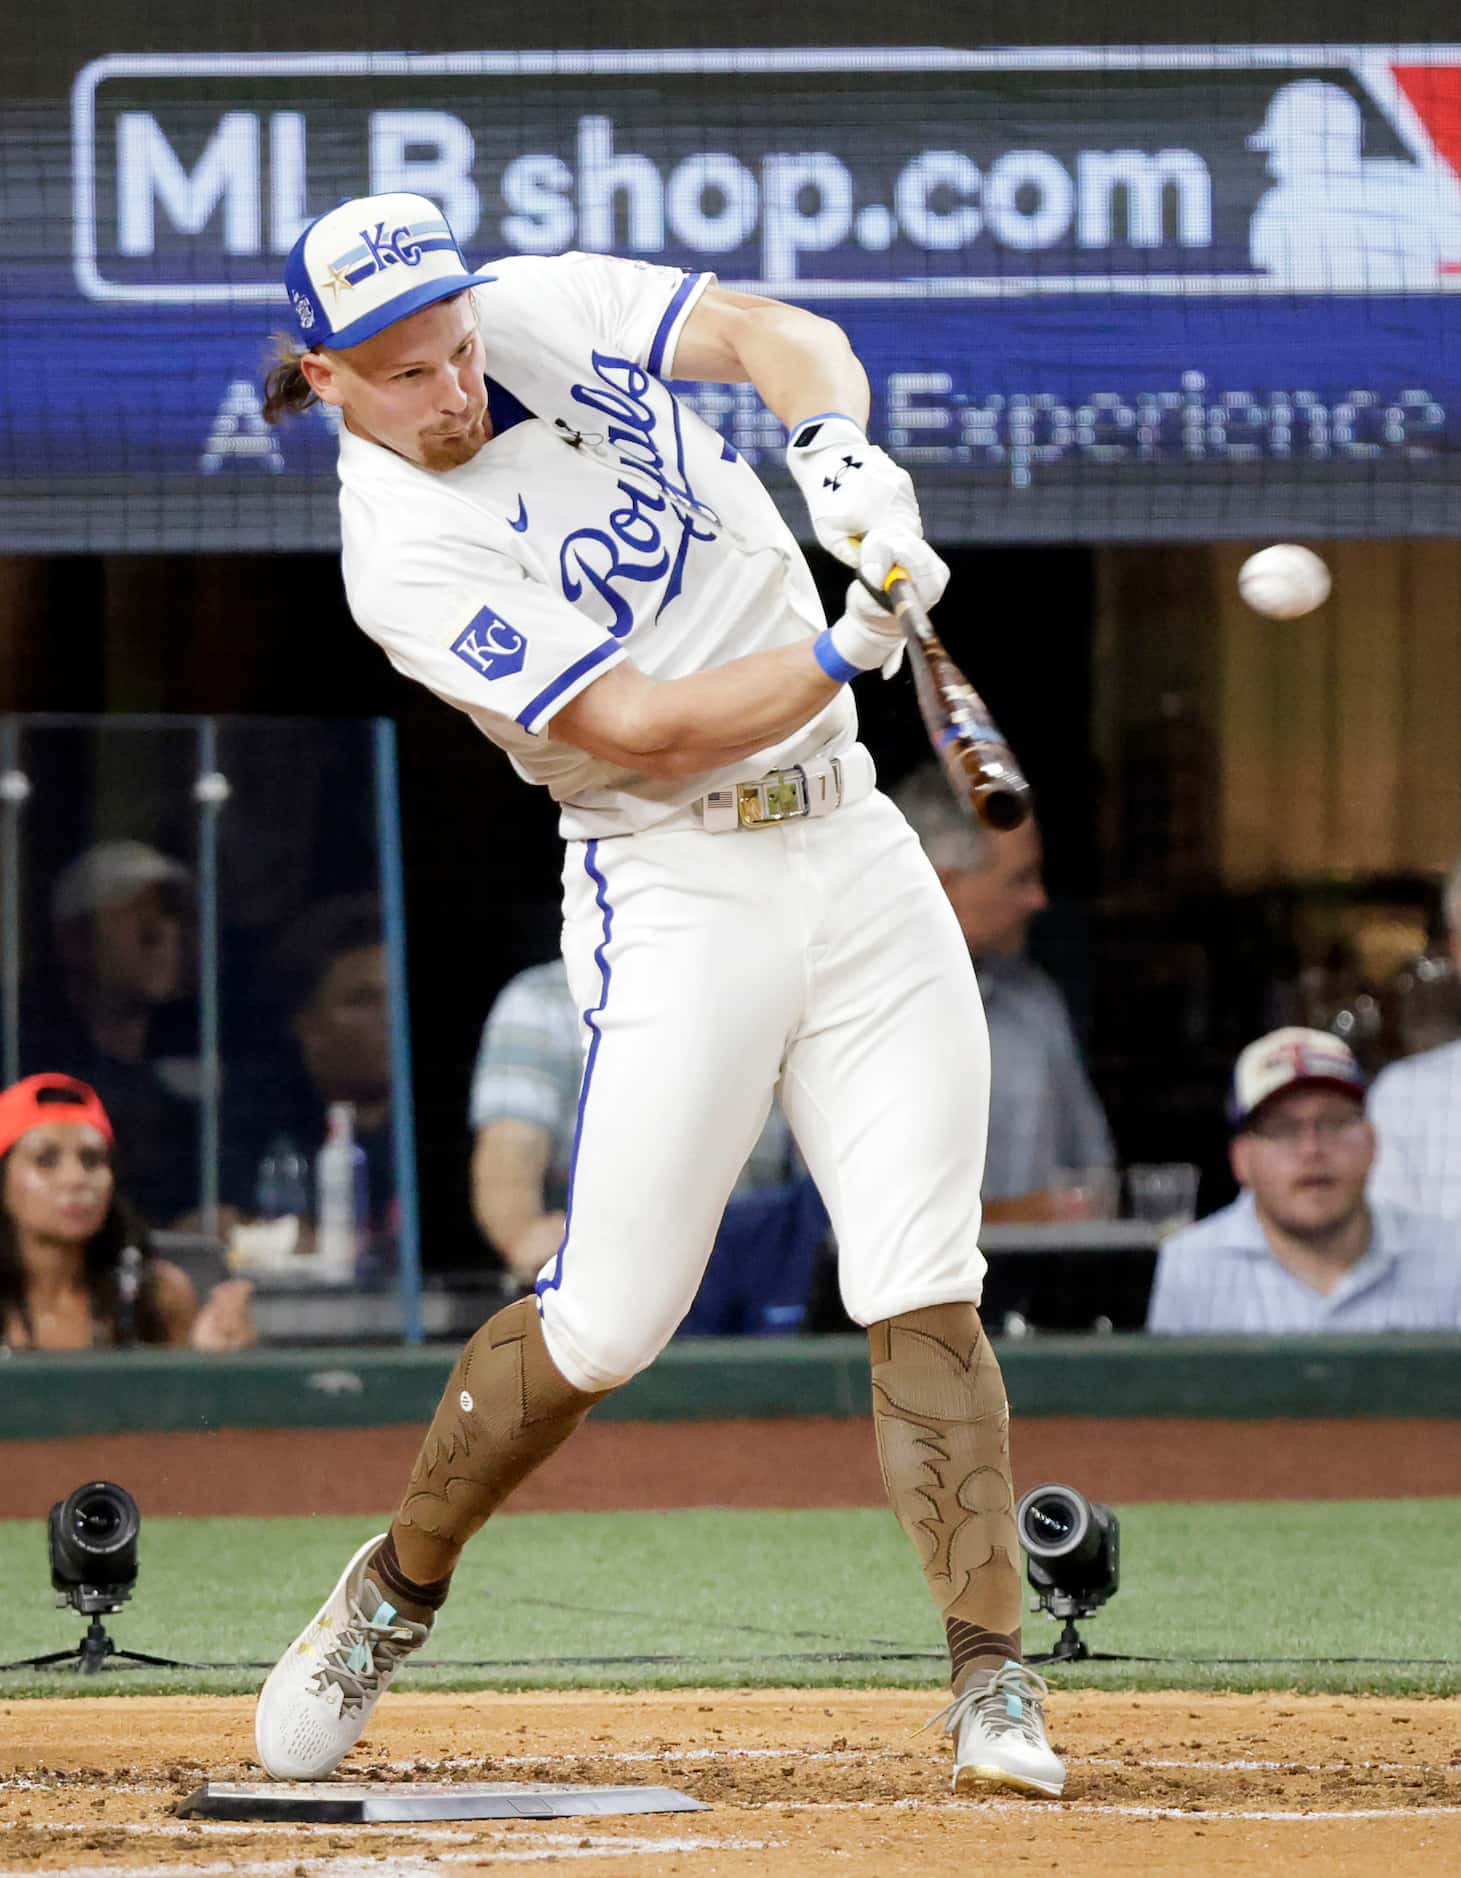 Kansas City Royals Bobby Witt, Jr of Colleyville, Texas connects on a hit during the second...